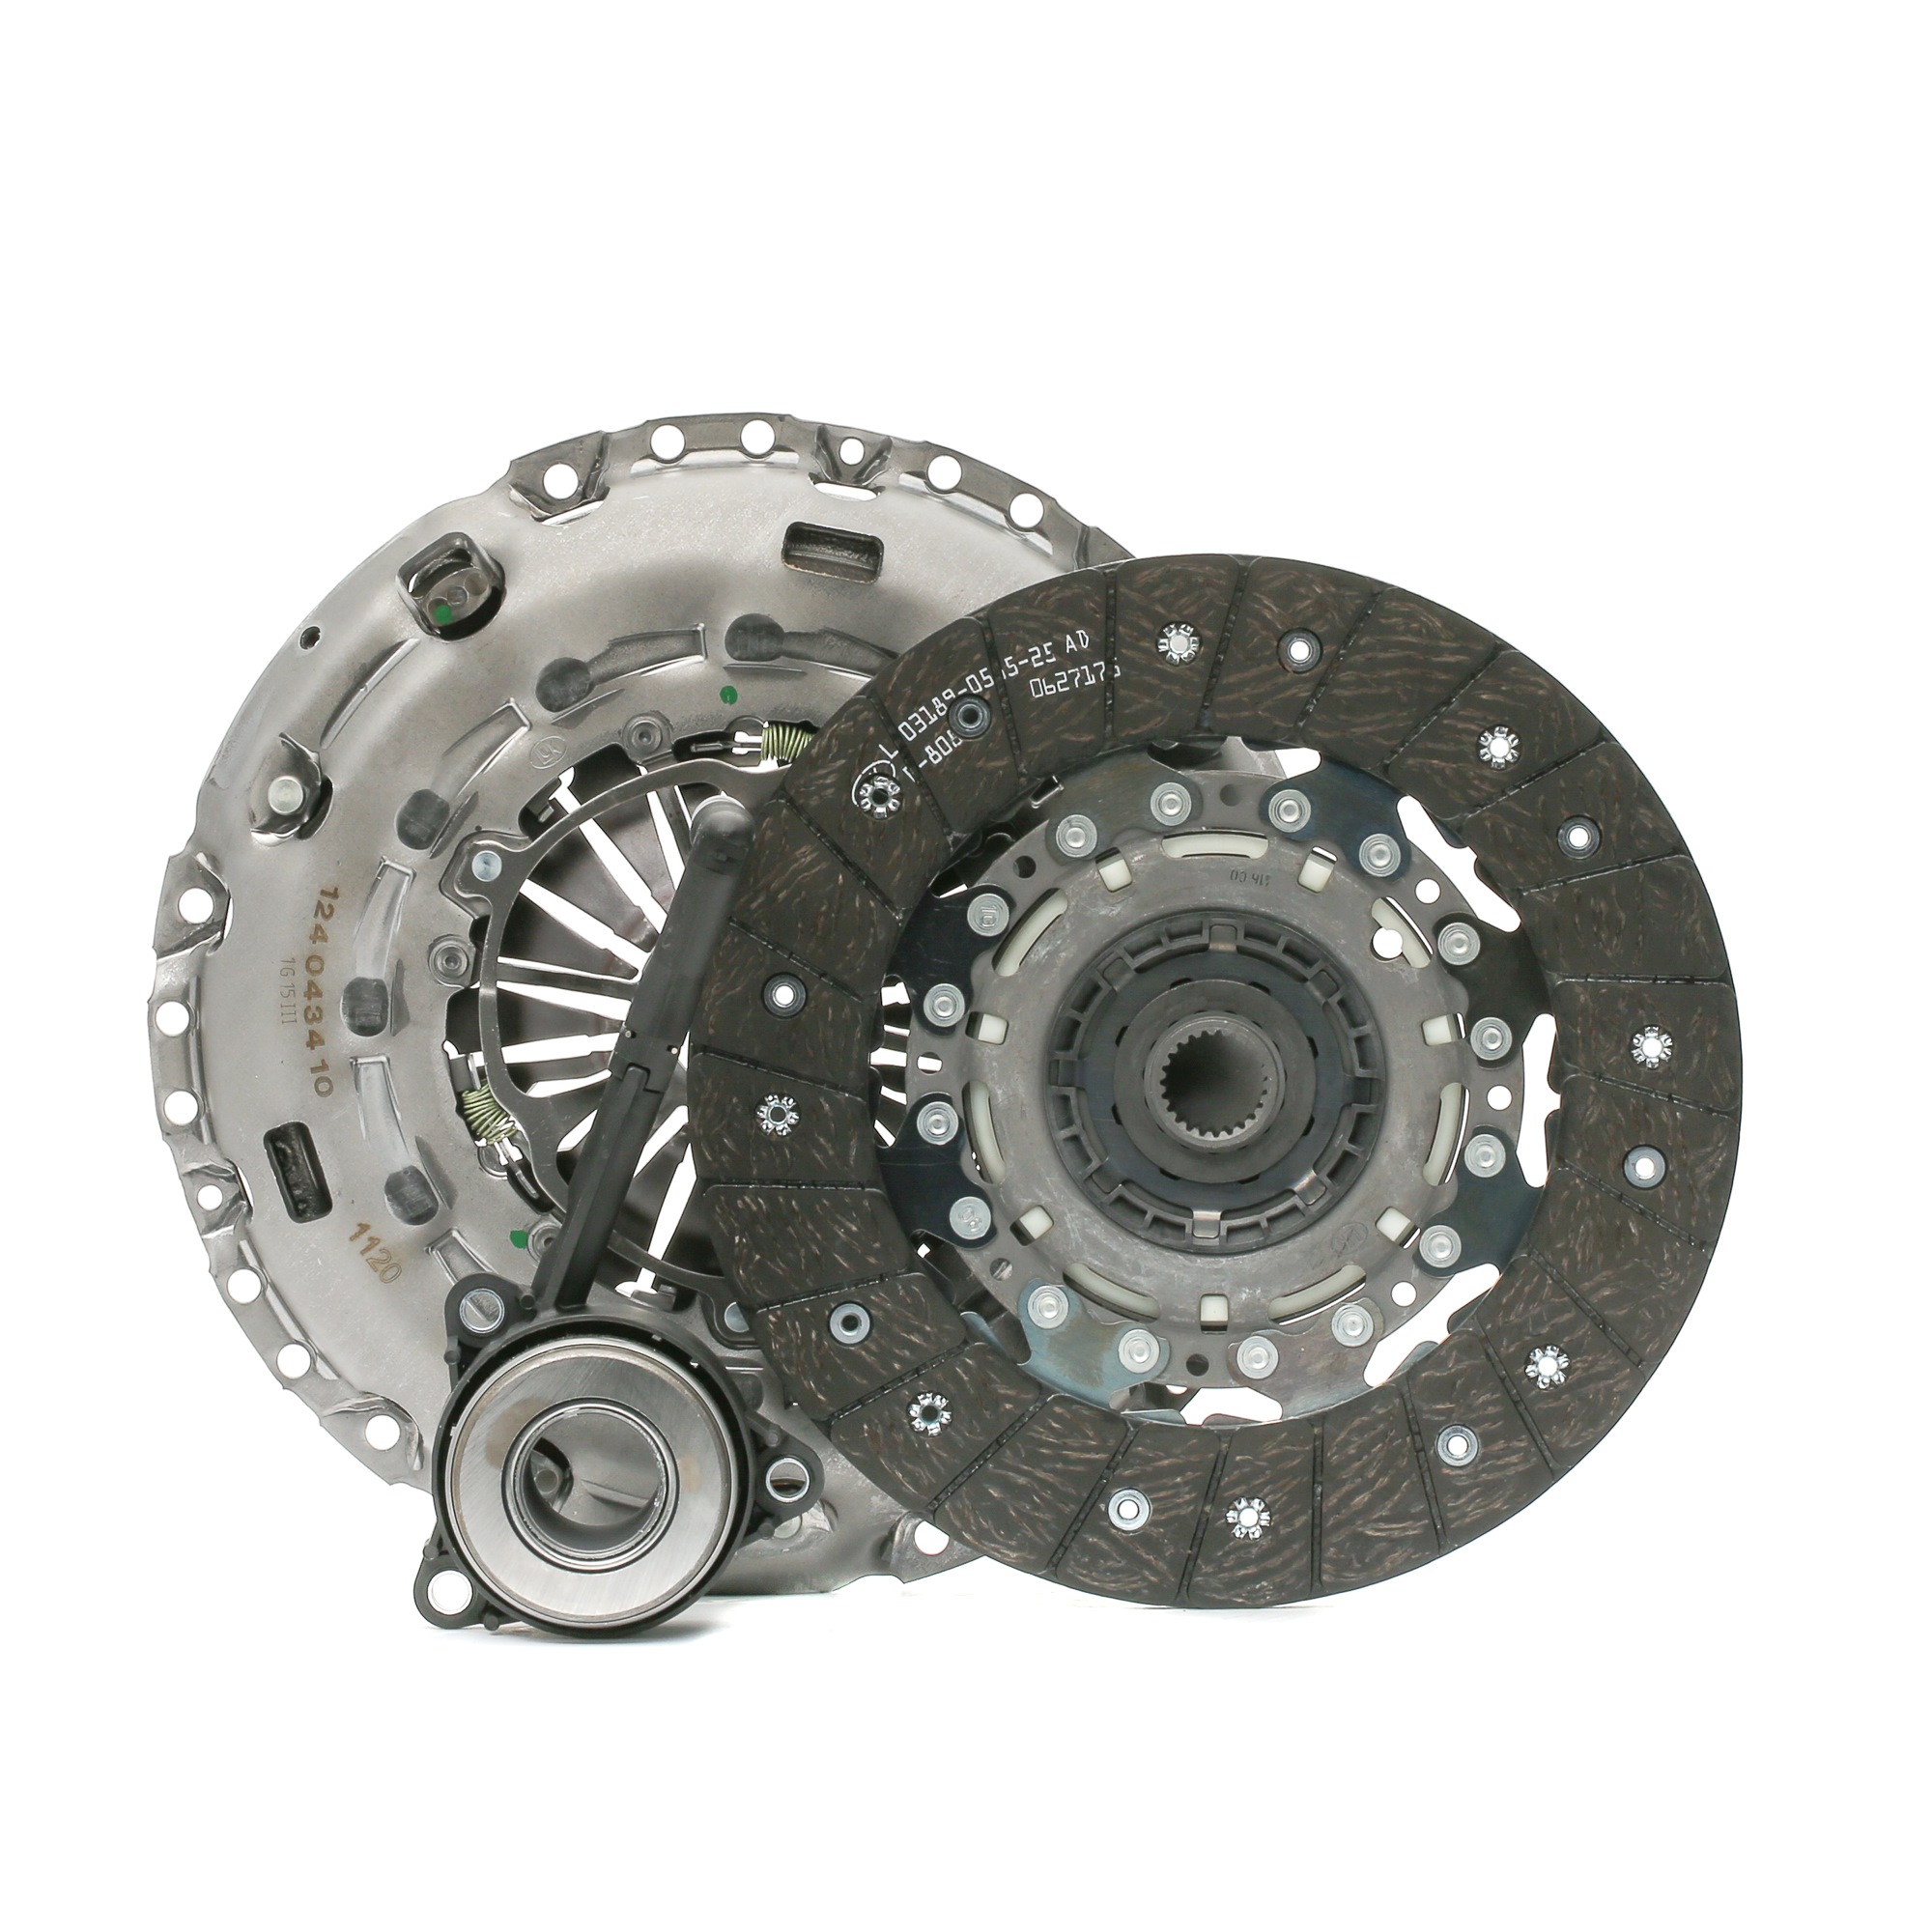 LuK 624 3279 33 Clutch kit for engines with dual-mass flywheel, with central slave cylinder, Requires special tools for mounting, Check and replace dual-mass flywheel if necessary., with automatic adjustment, 240mm